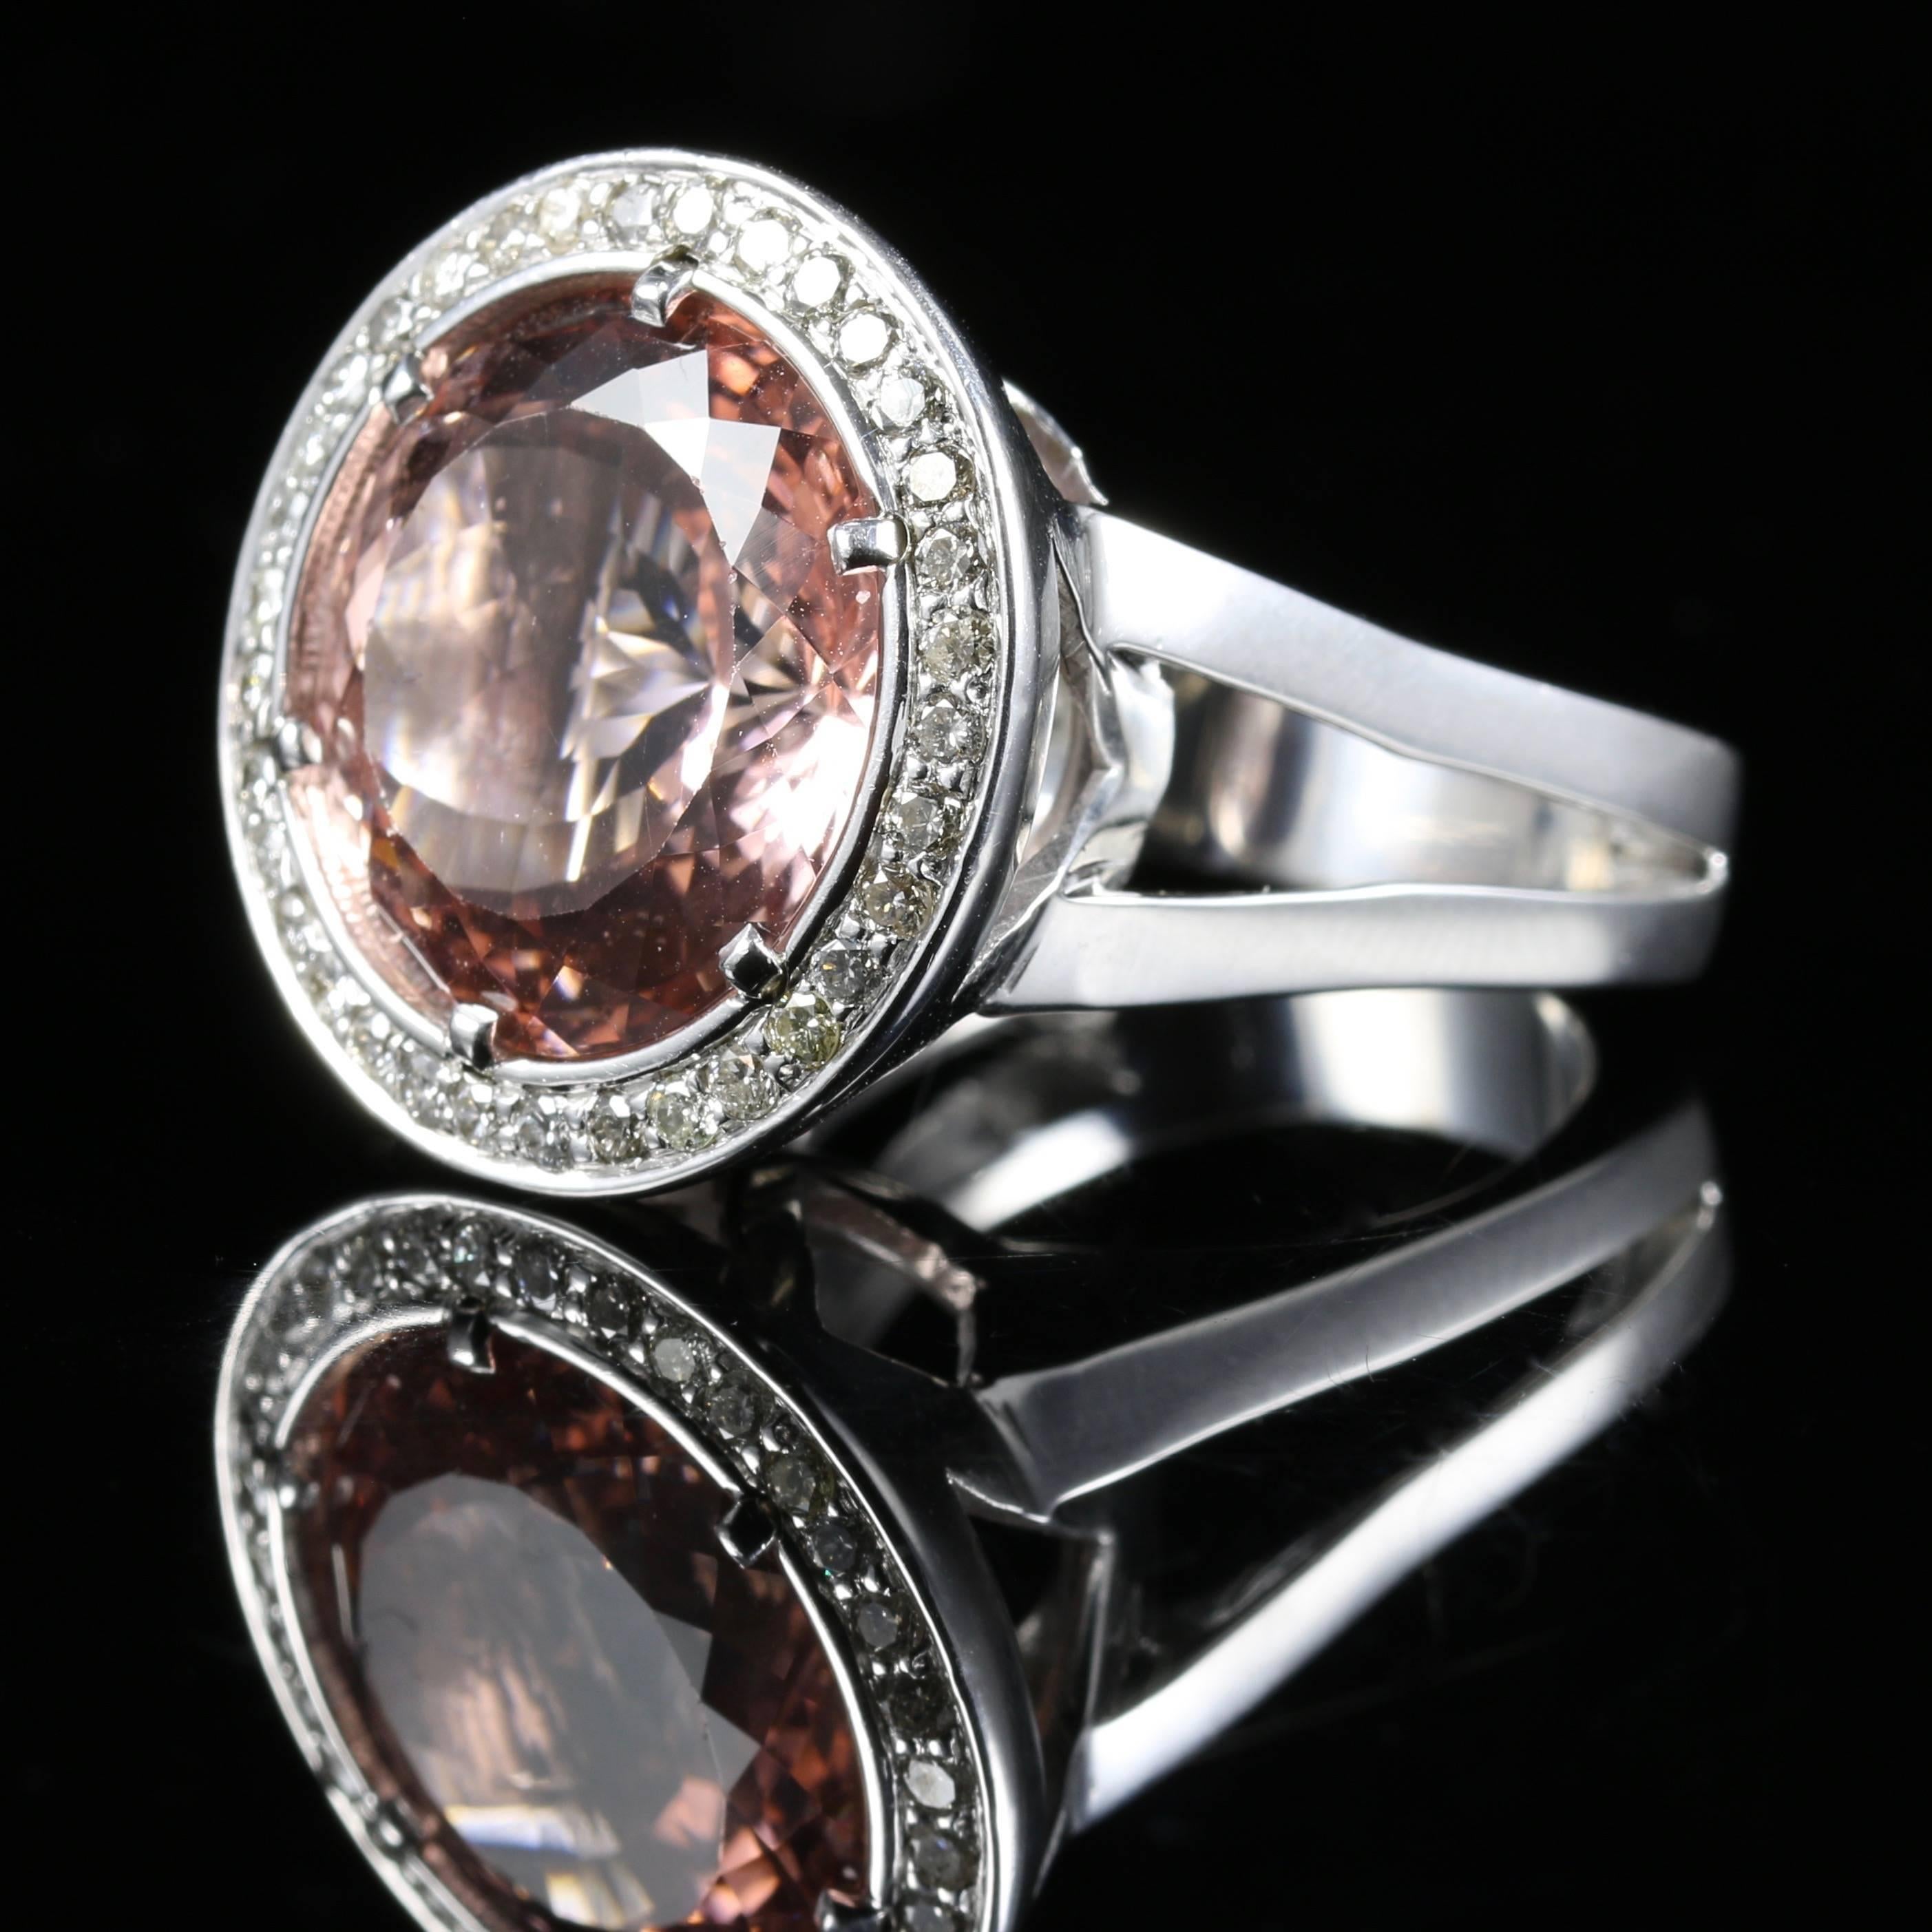 This stunning Morganite Diamond ring is one of the largest most fabulous Morganite rings we have ever seen, with over 25ct of Morganite.

Morganite, also known as Pink Beryl, Rose Beryl, Pink Emerald, and Cesian Beryl, is a rare light pink to